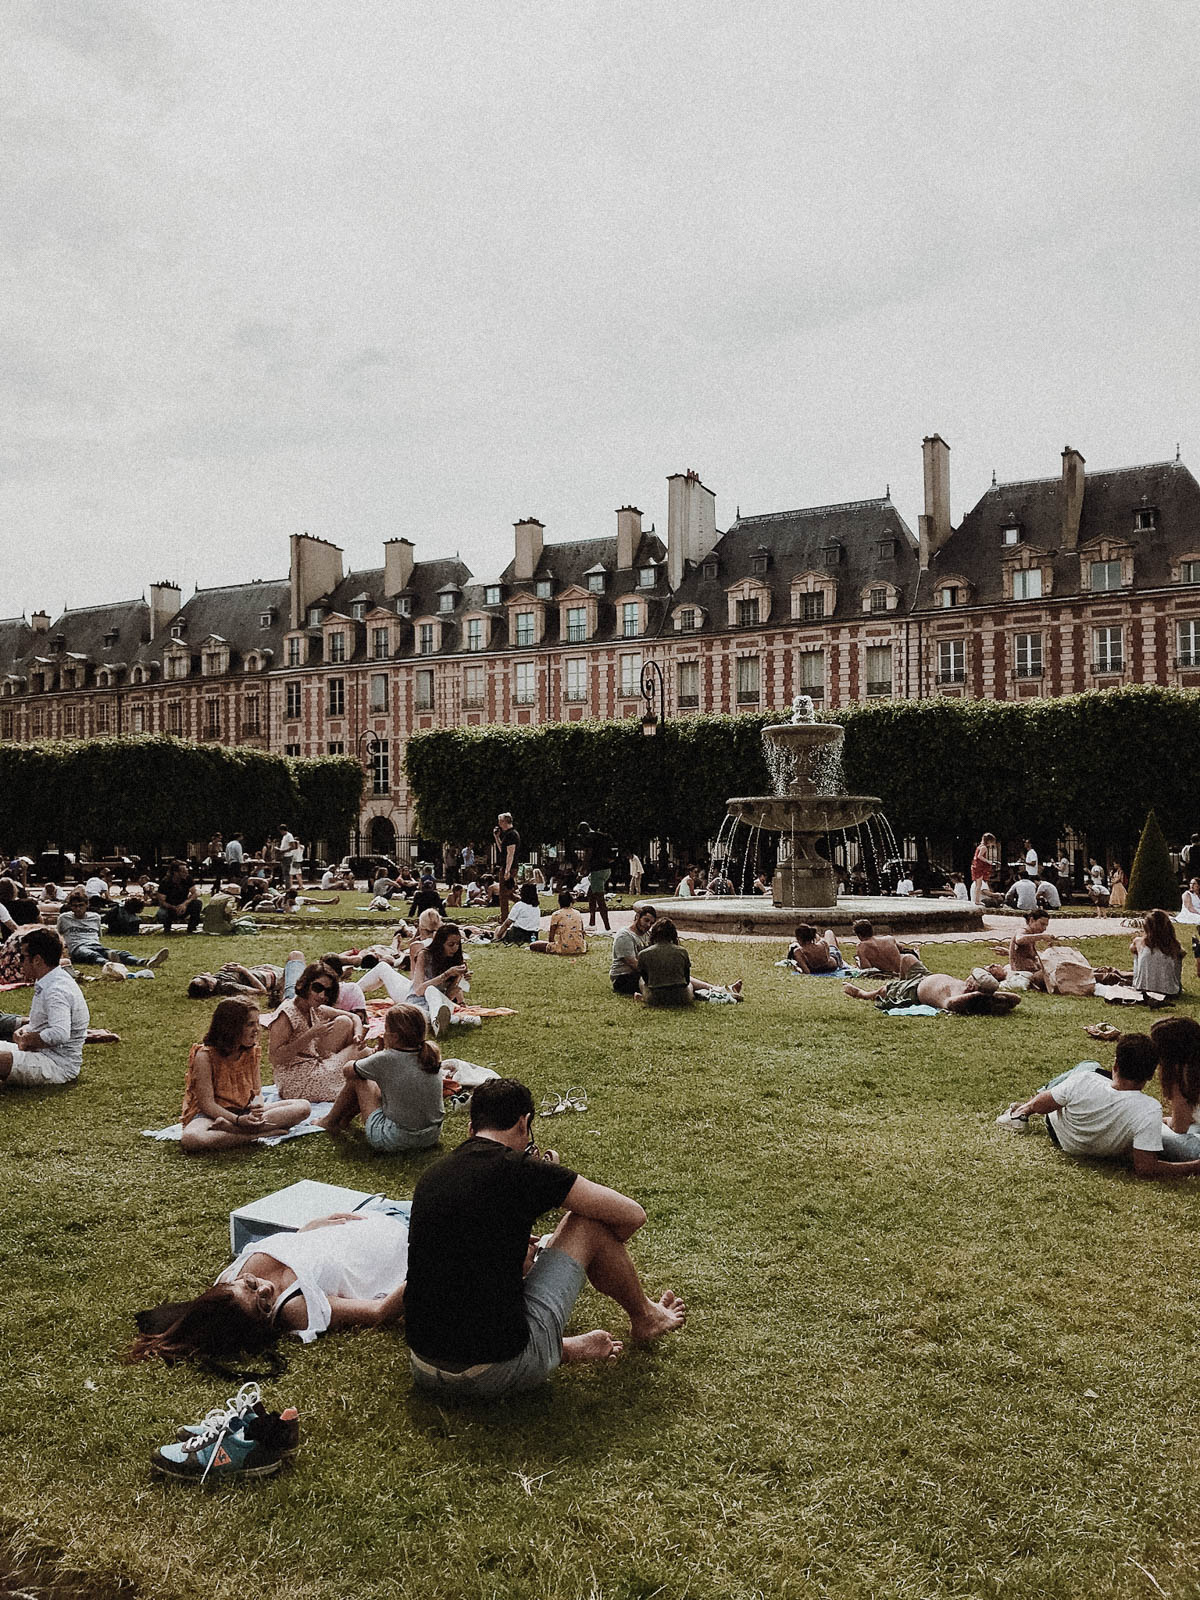 Paris France Travel Guide - Sunbathing in Park, European Architecture and Buildings / RG Daily Blog